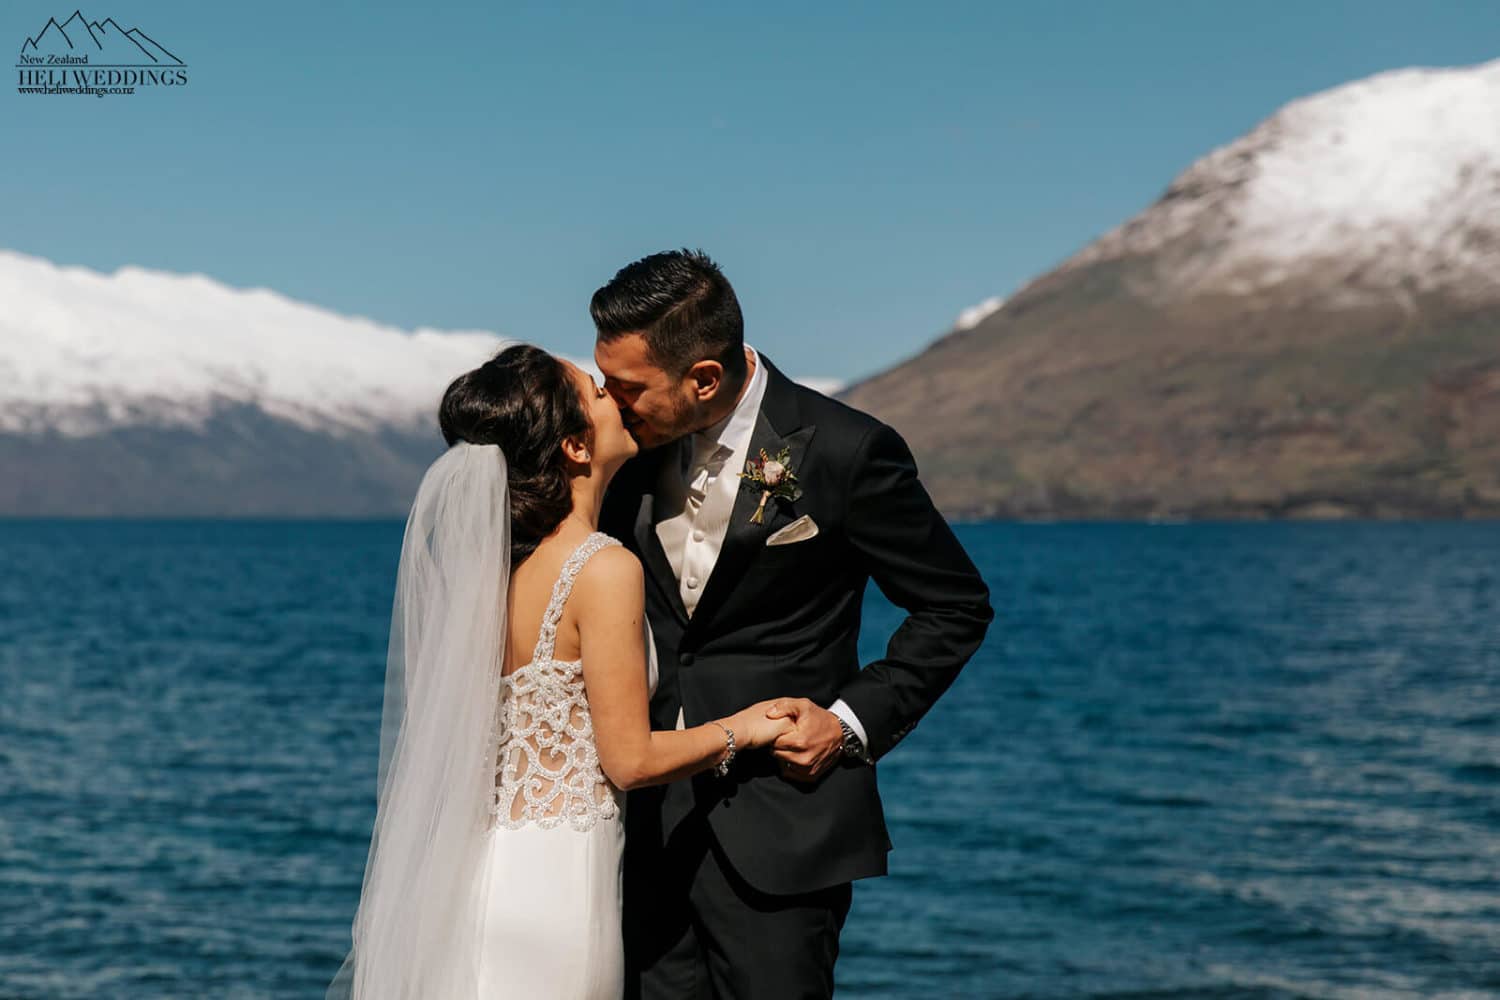 Wedding ceremony by the lake in Queenstown